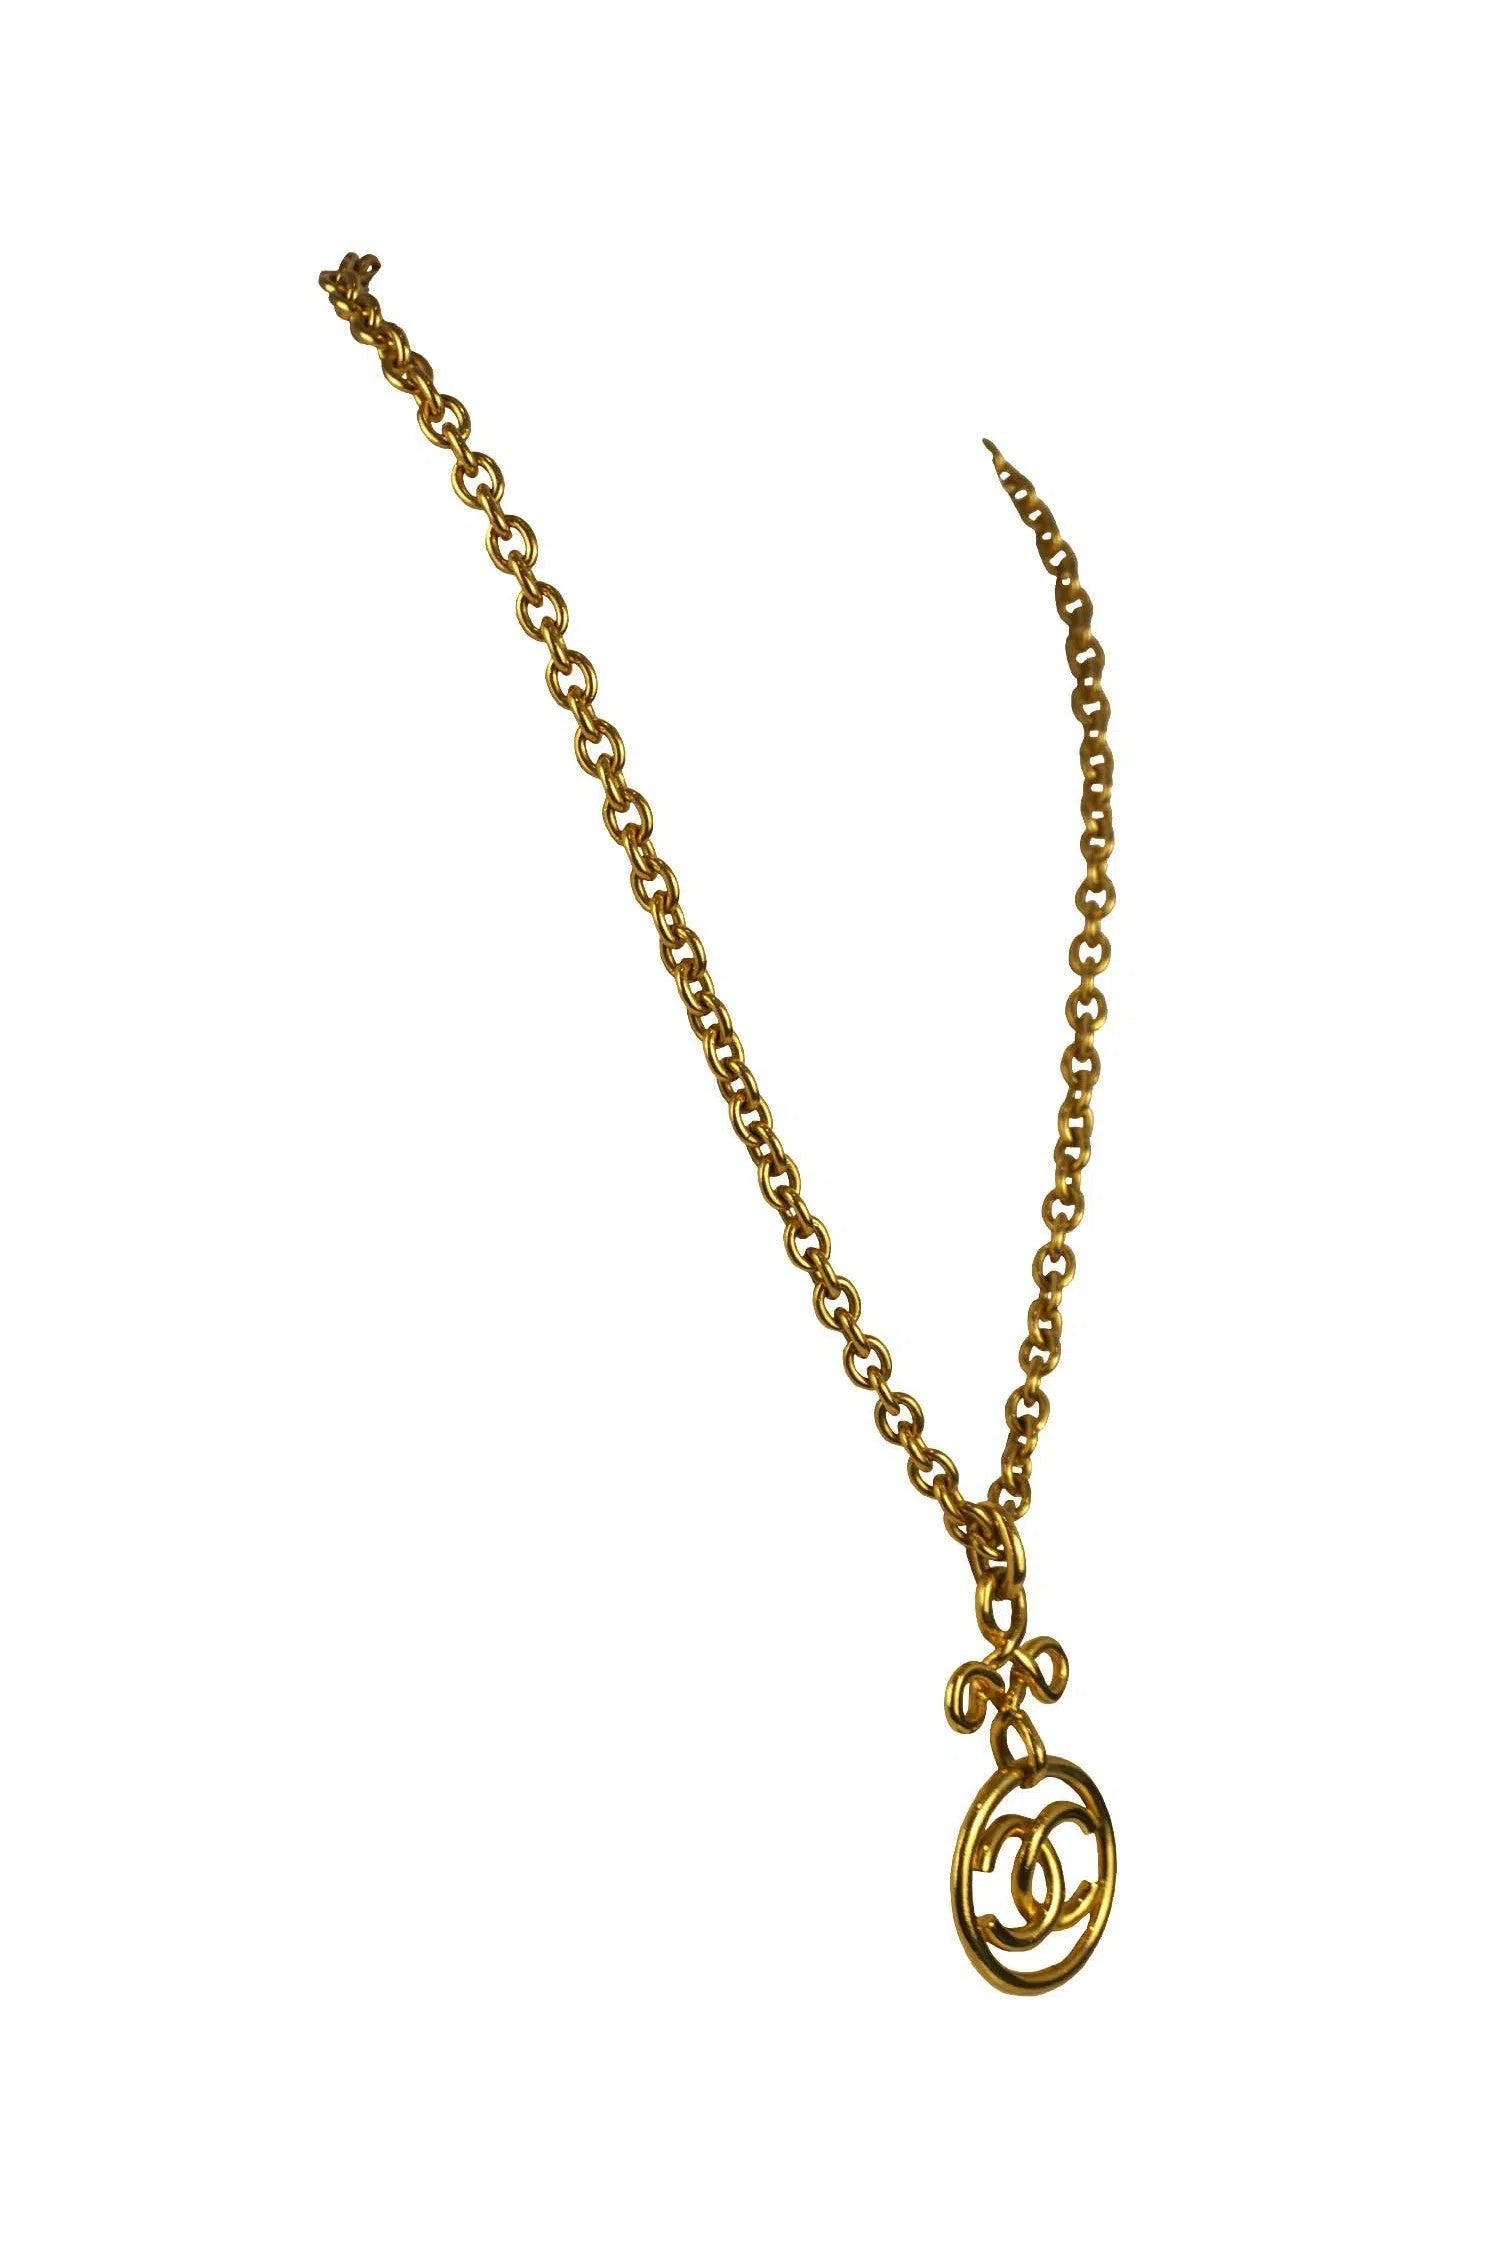 Chanel Vintage Twisted Cross CC Pendant Necklace 1993 - Foxy Couture Carmel